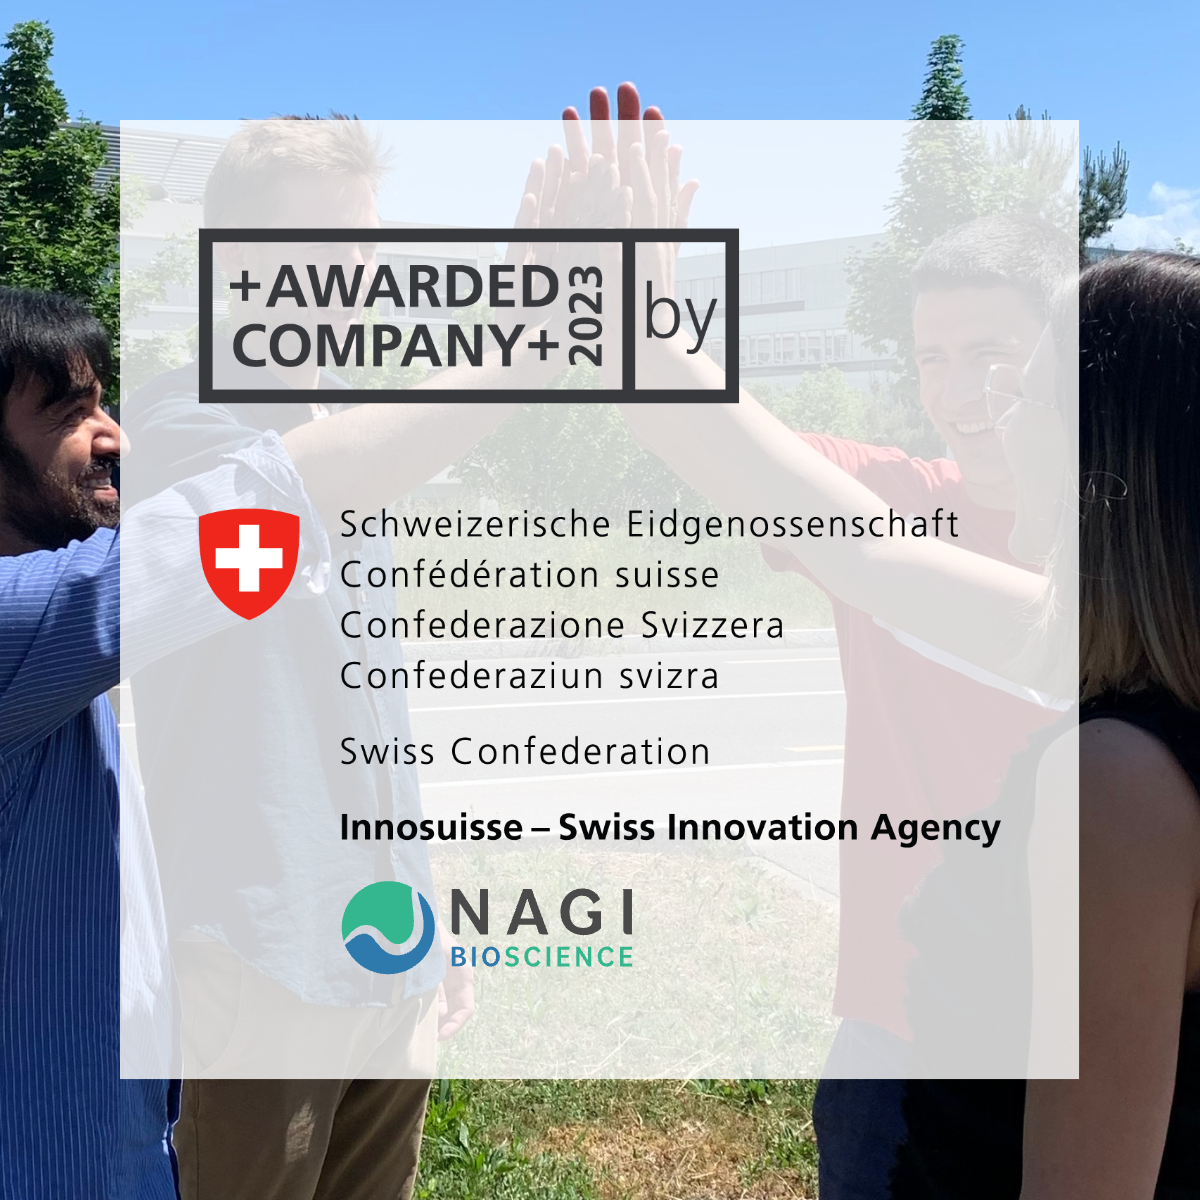 Nagi Bioscience receives the Innosuisse Certificate accrediting for sustainable growth